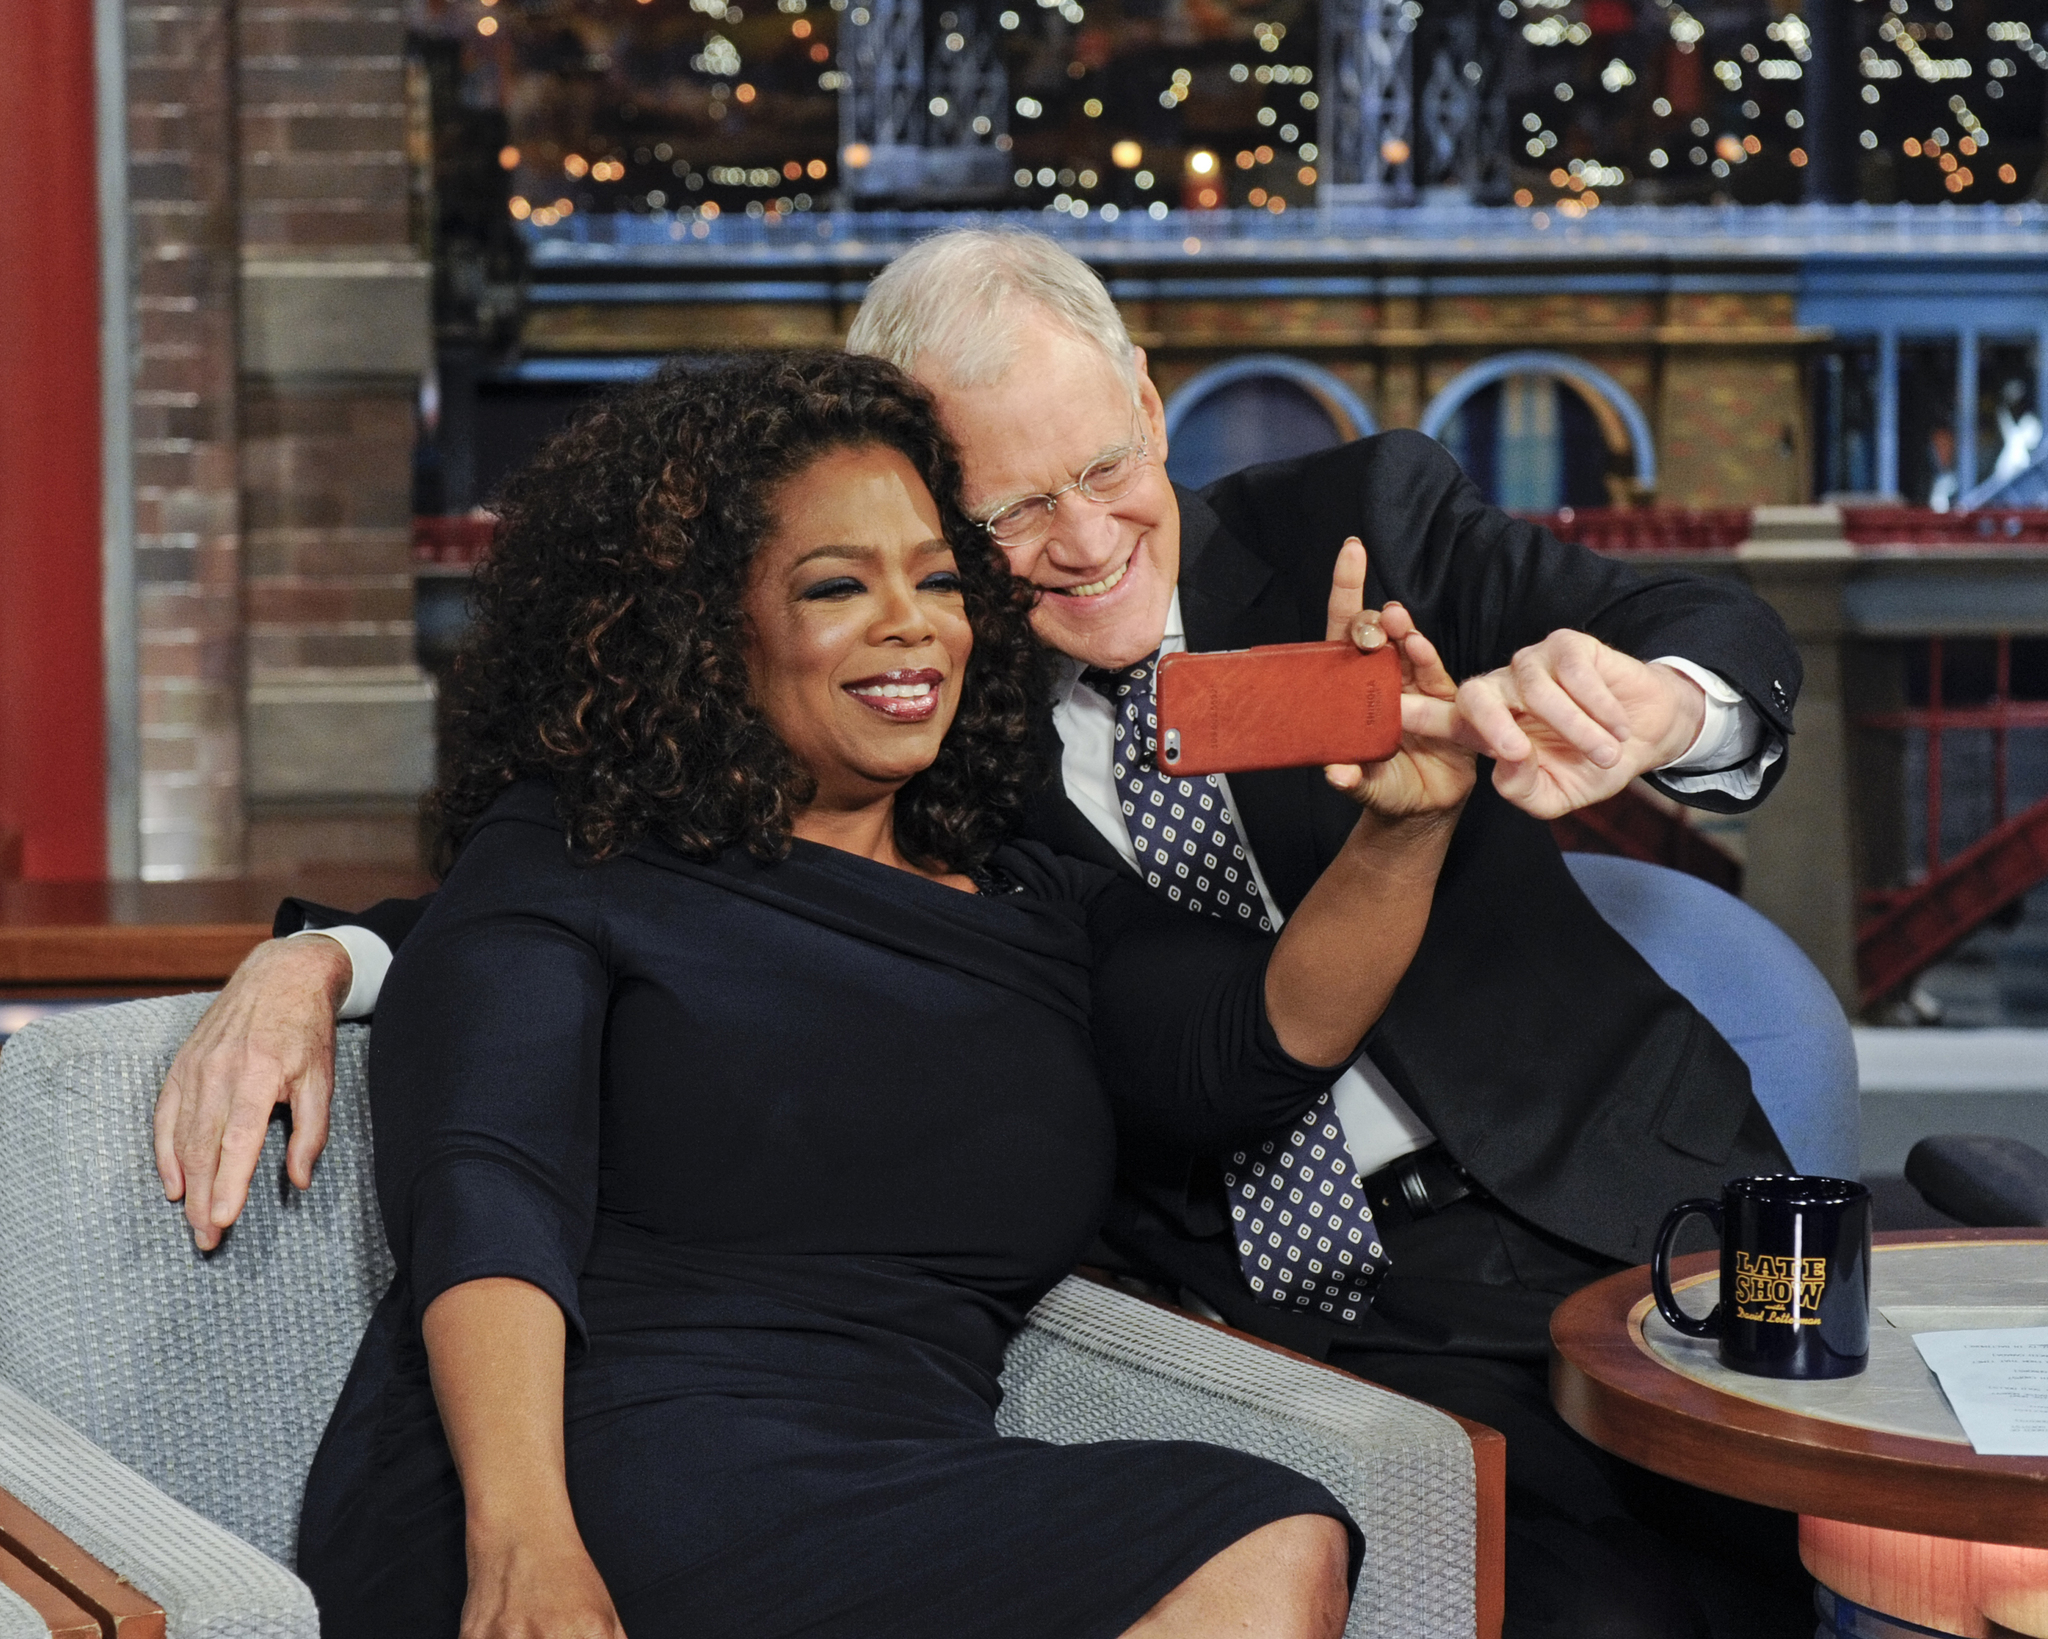 David Letterman and Oprah Winfrey at event of Late Show with David Letterman (1993)